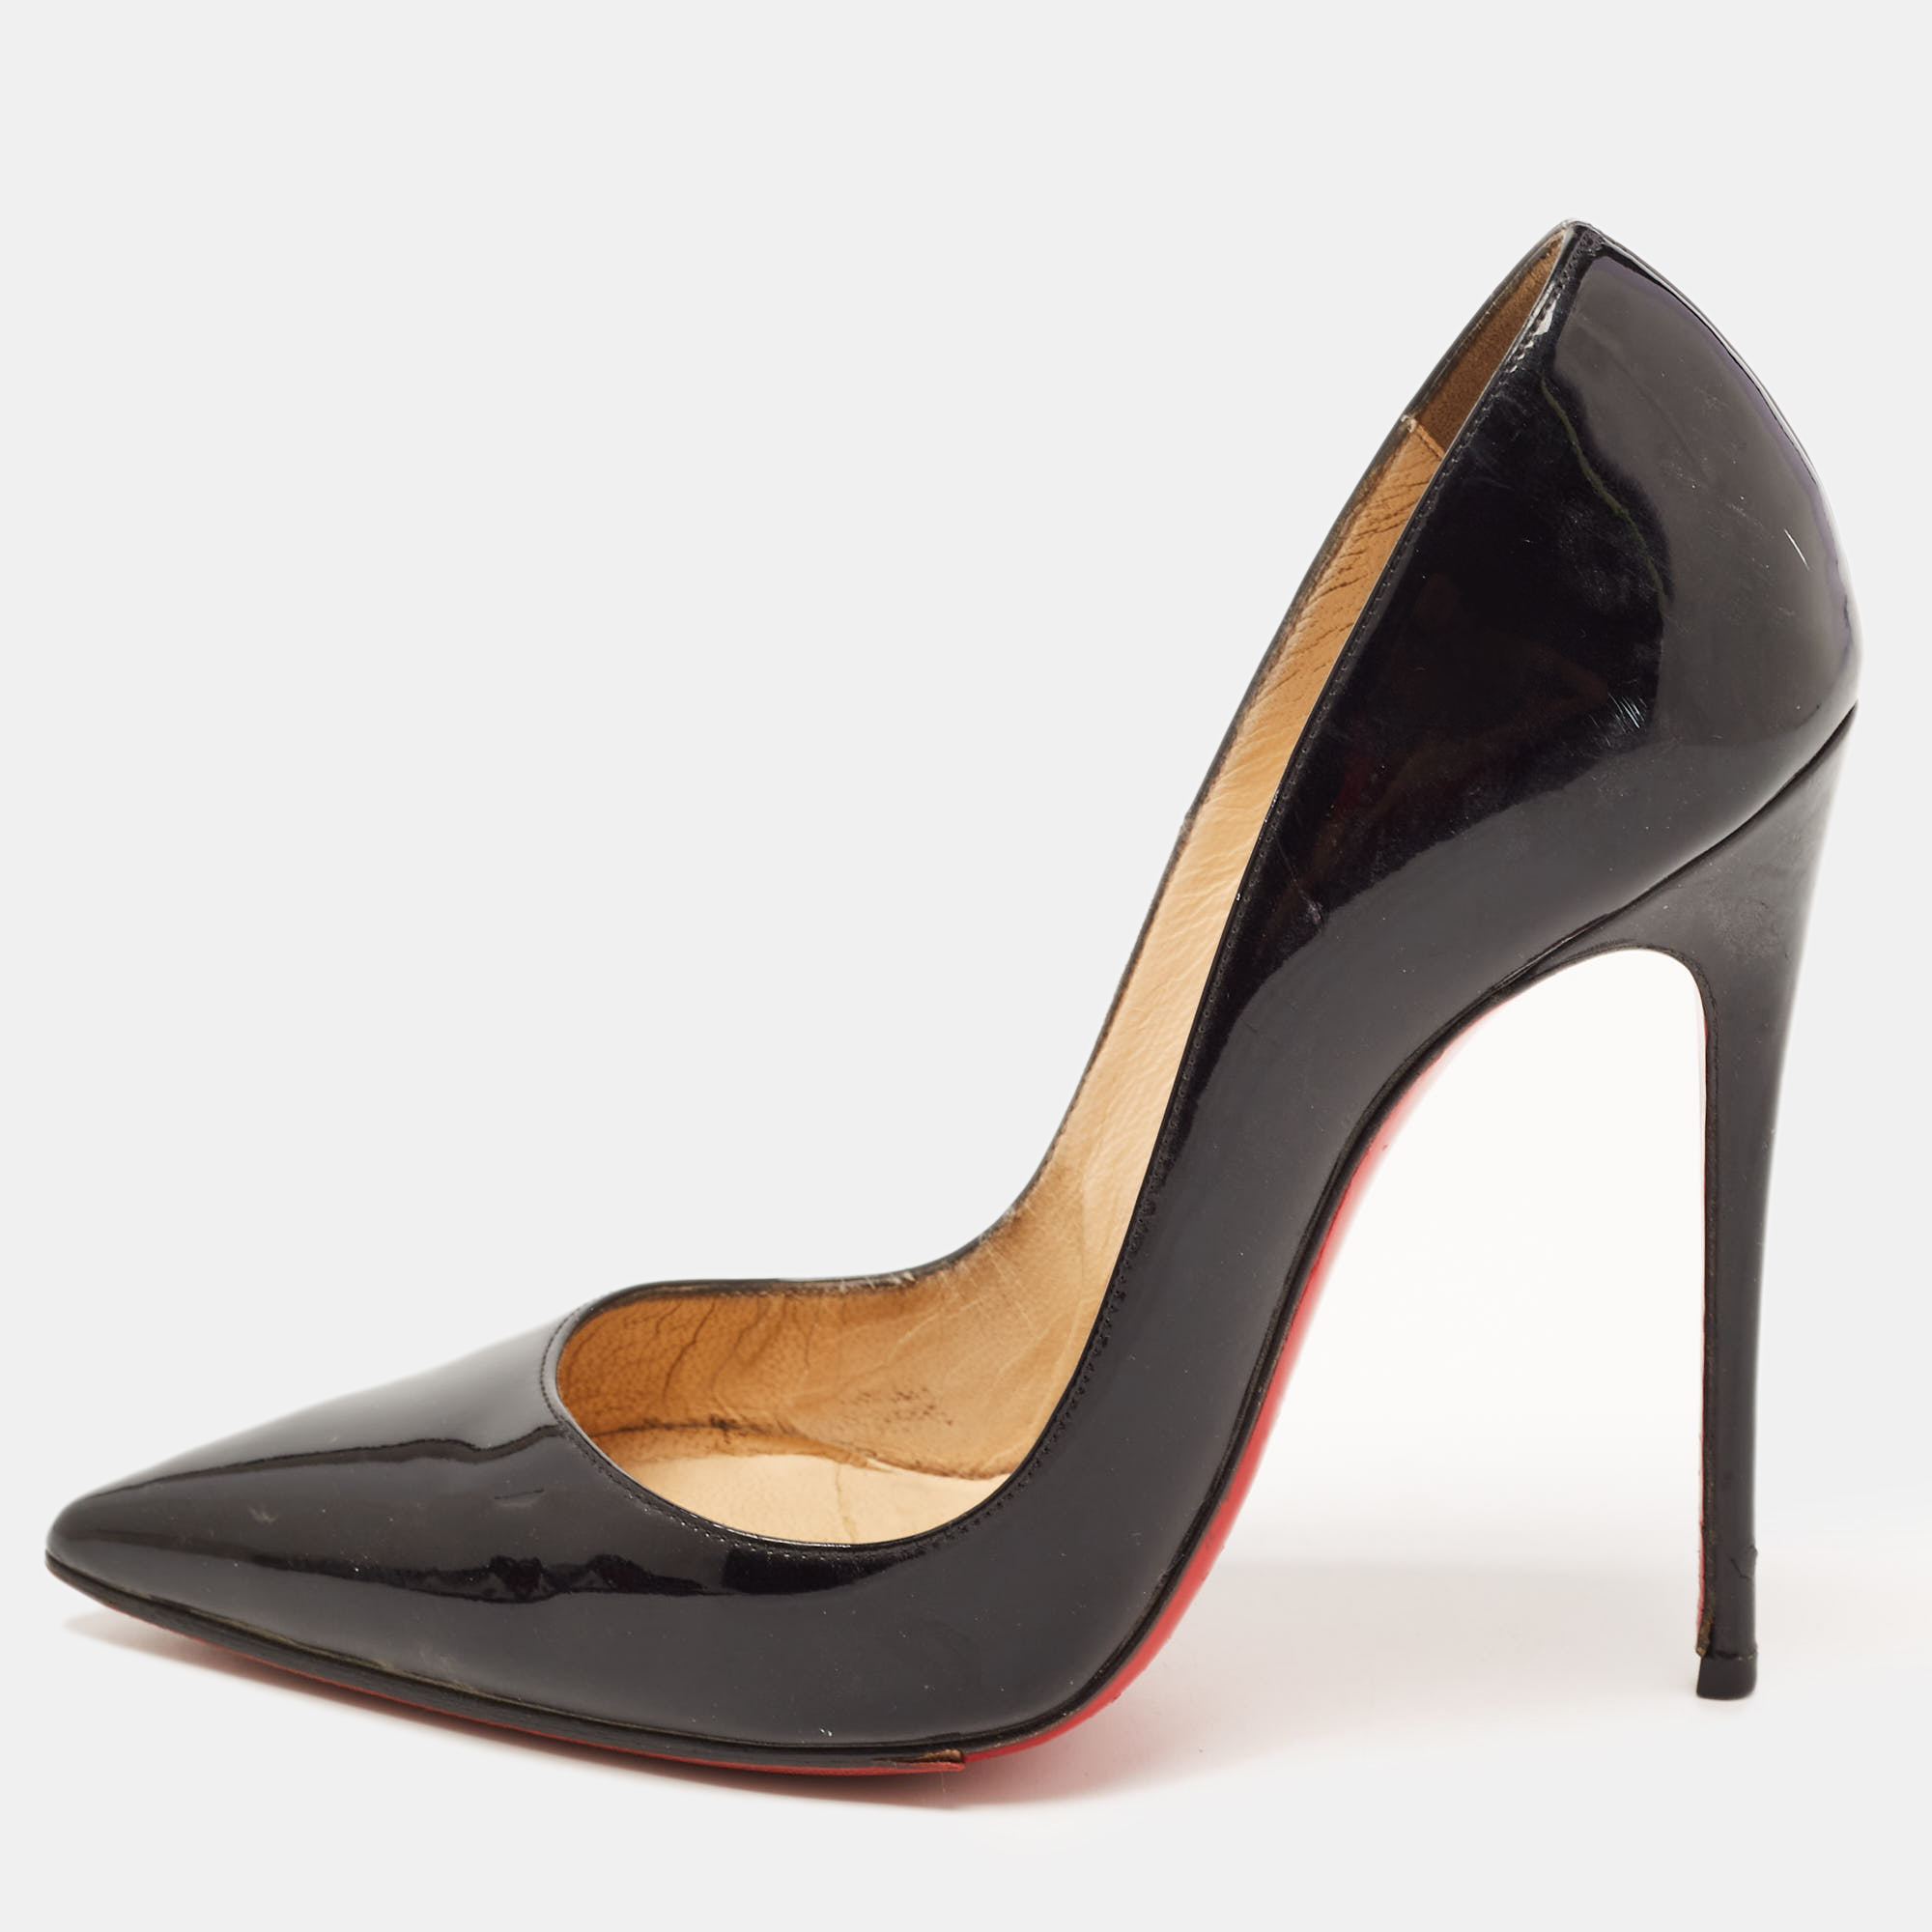 Pre-owned Christian Louboutin Black Patent Leather So Kate Pumps Size 36